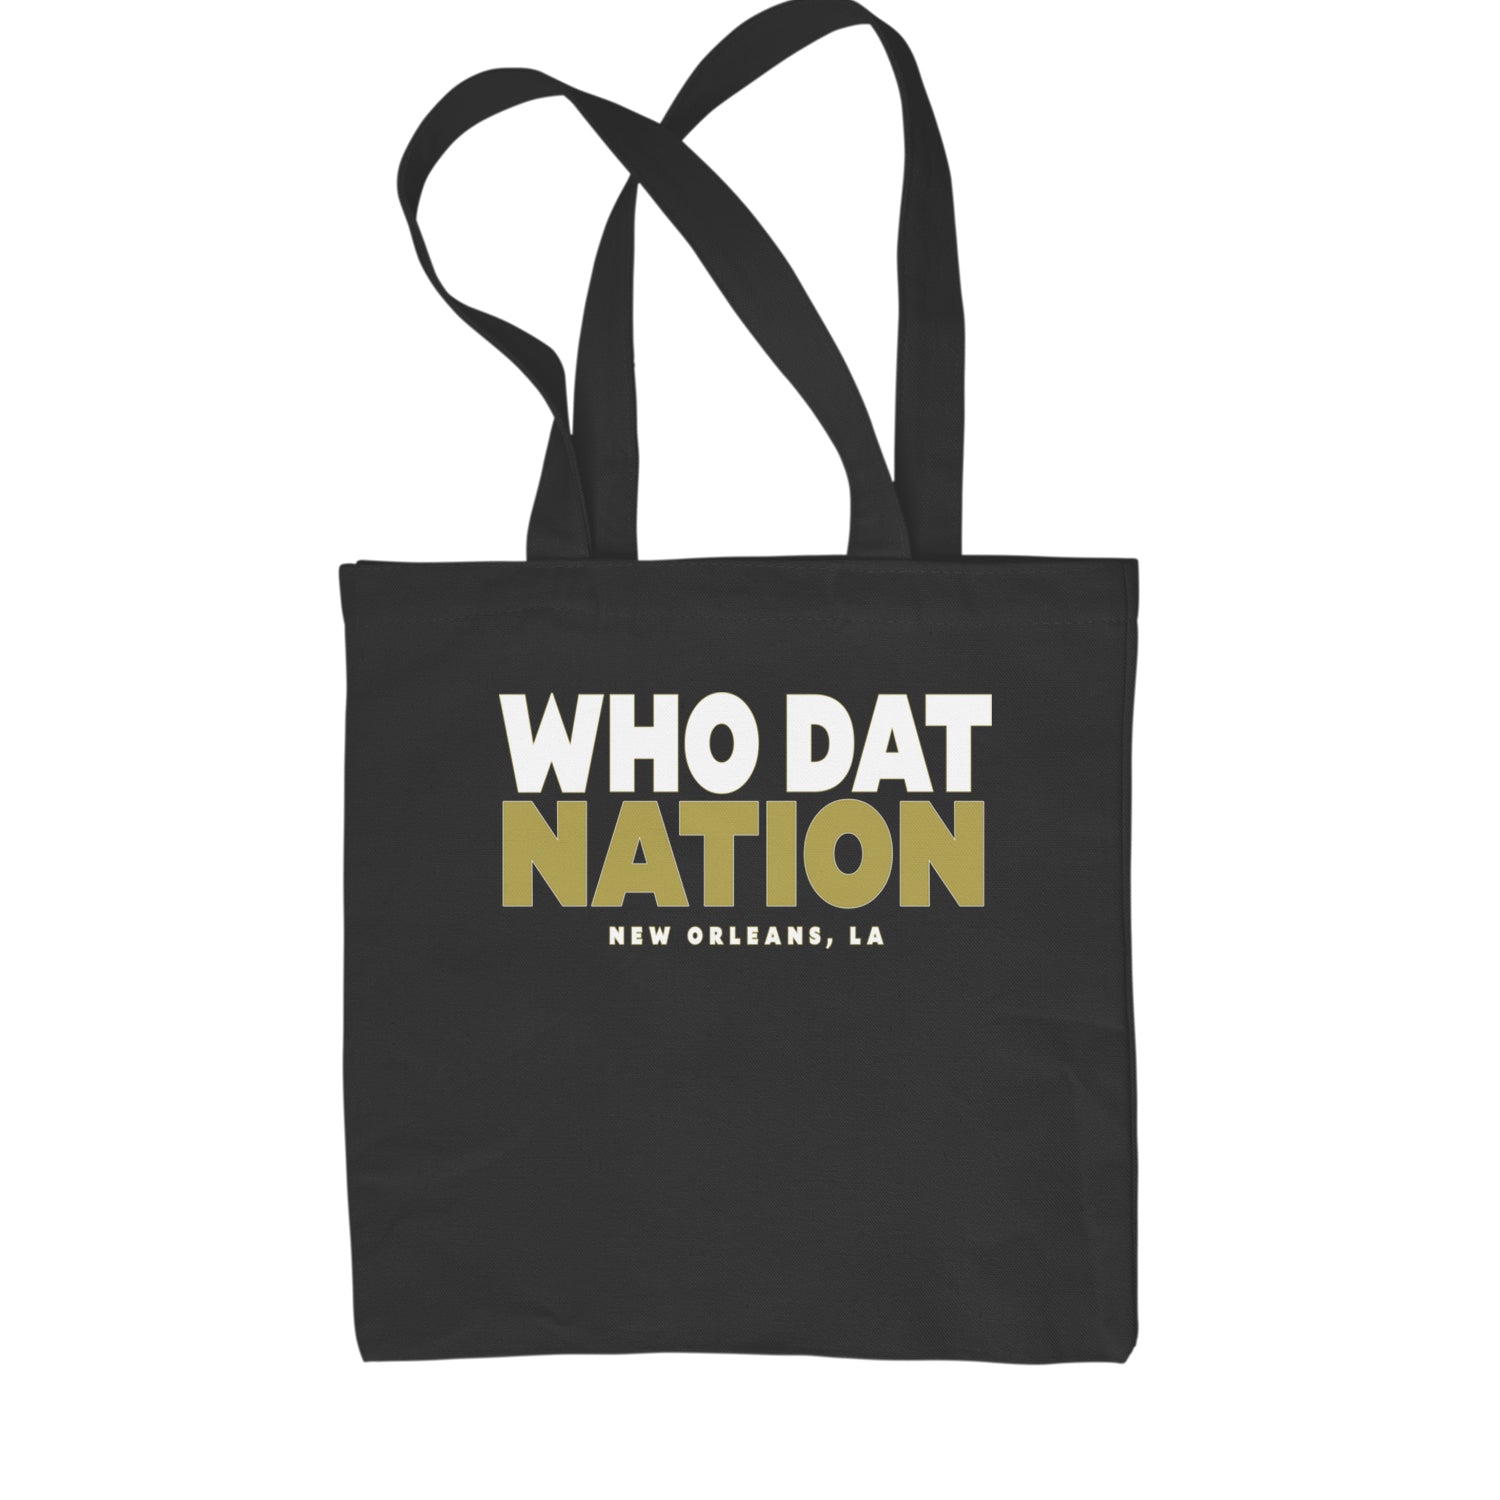 New Orleans Who Dat Nation Shopping Tote Bag Black